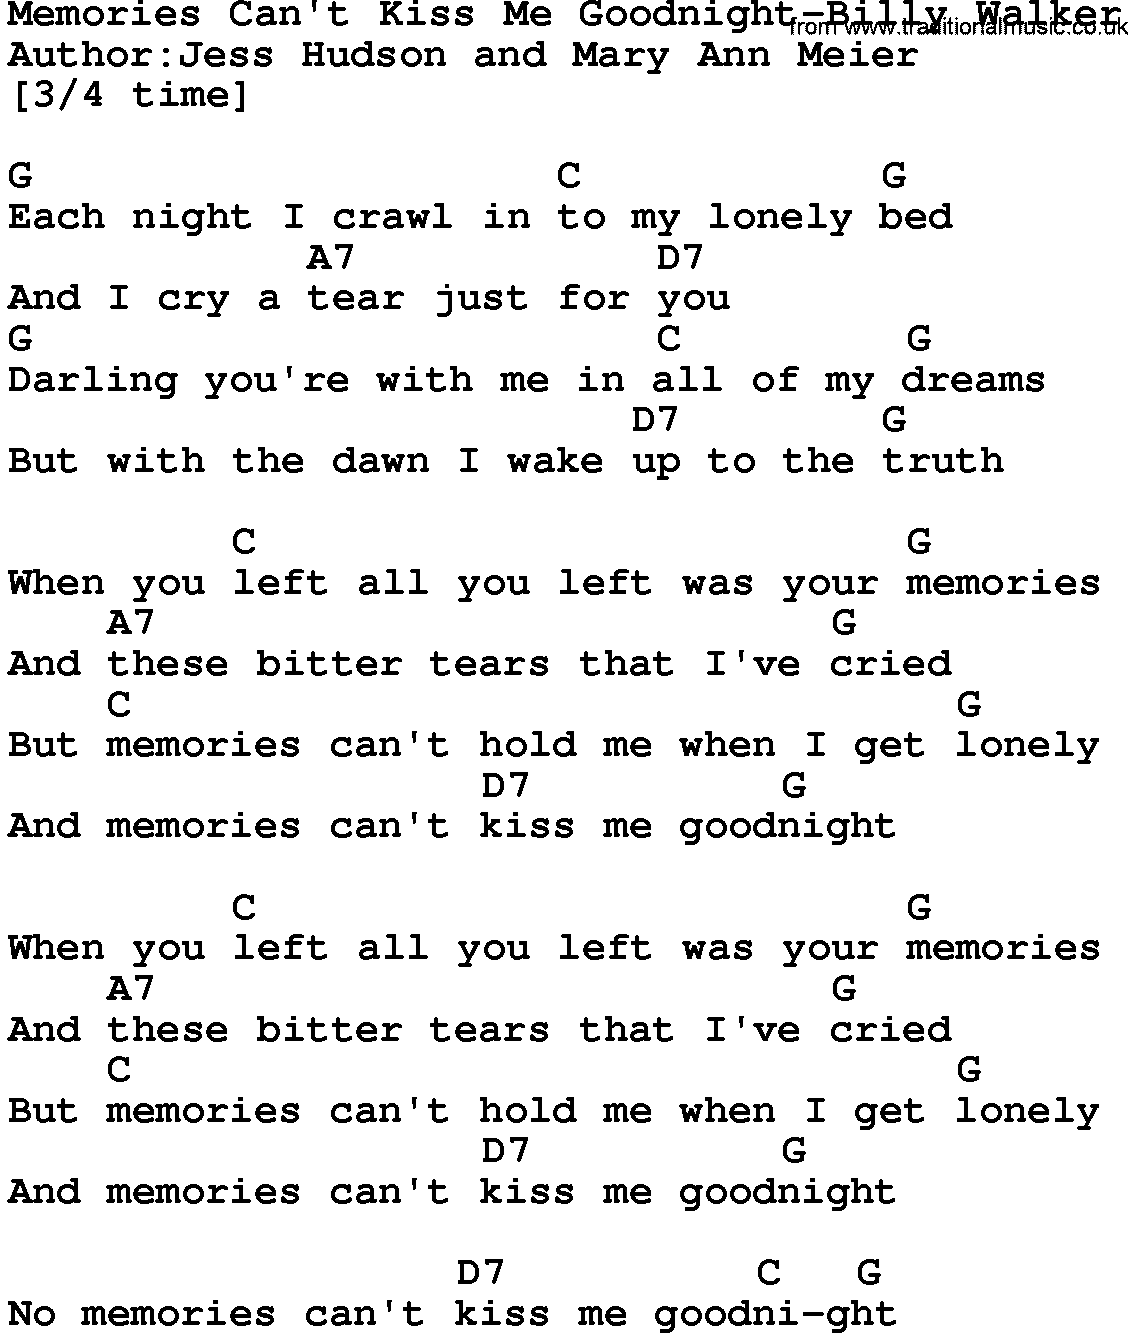 Country music song: Memories Can't Kiss Me Goodnight-Billy Walker lyrics and chords